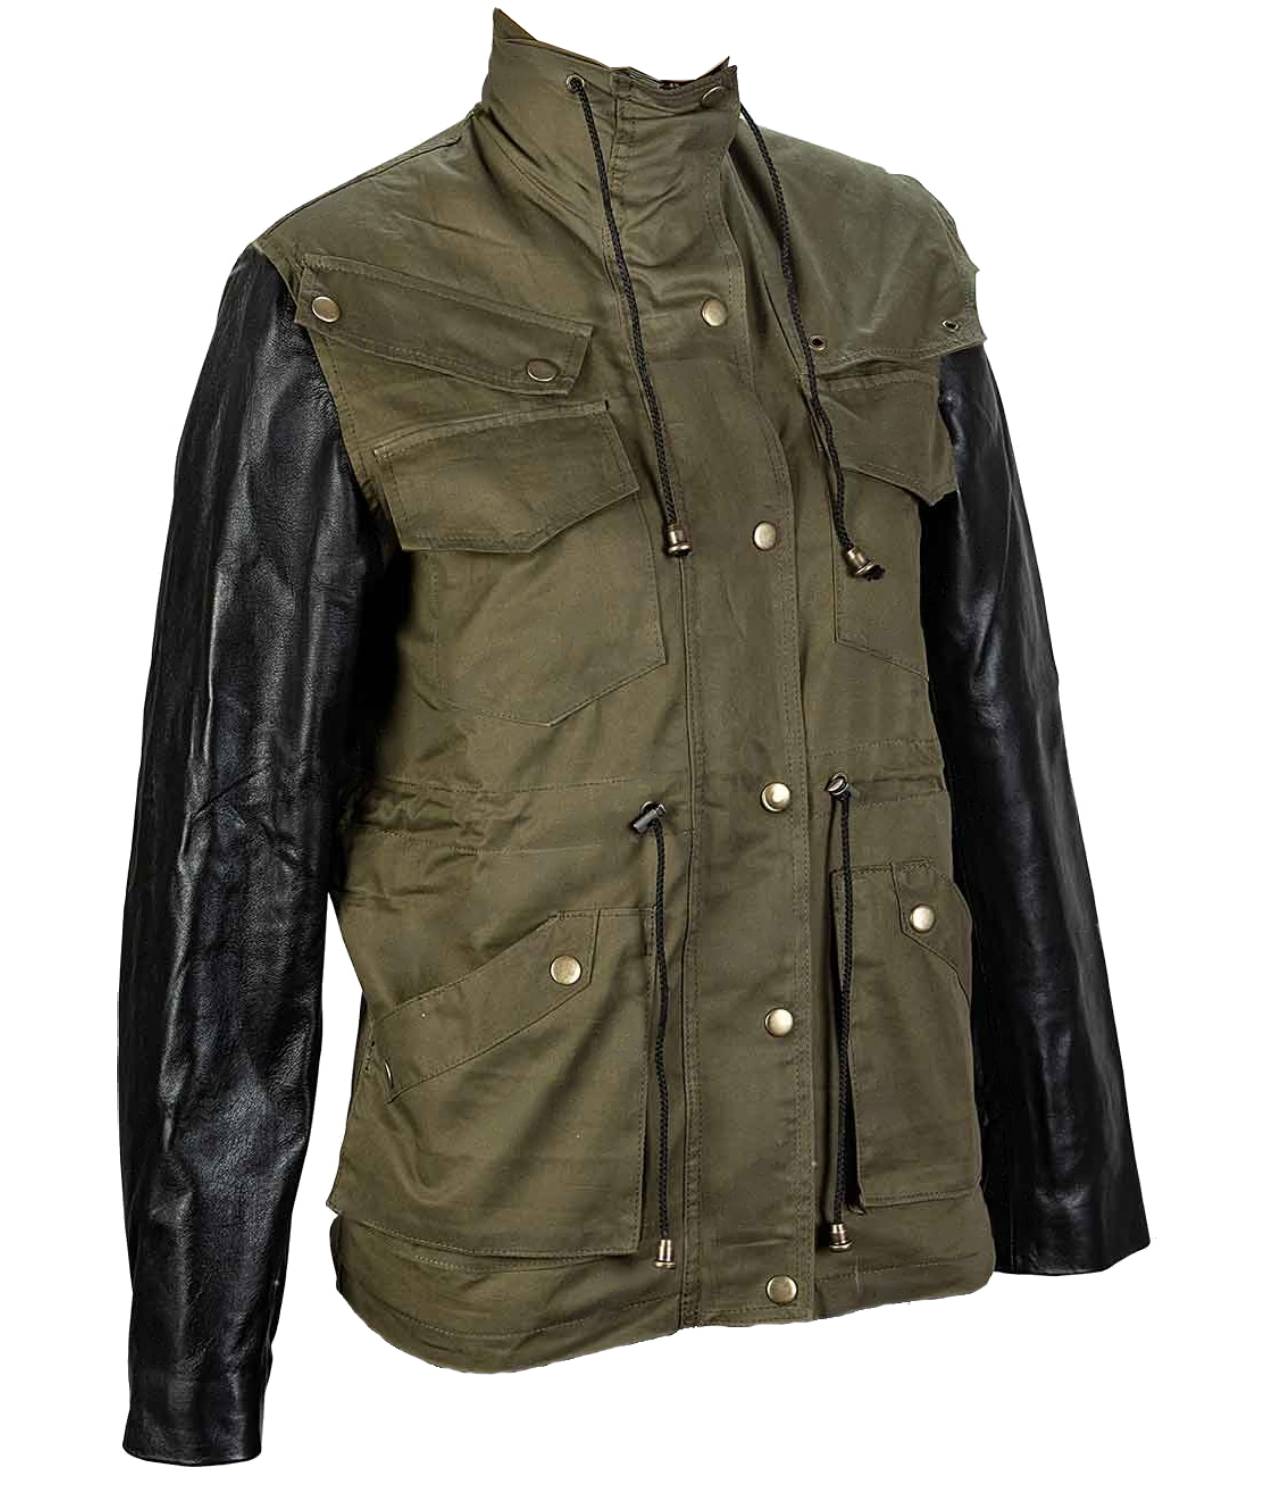 Army Jacket with Leather Sleeves 2